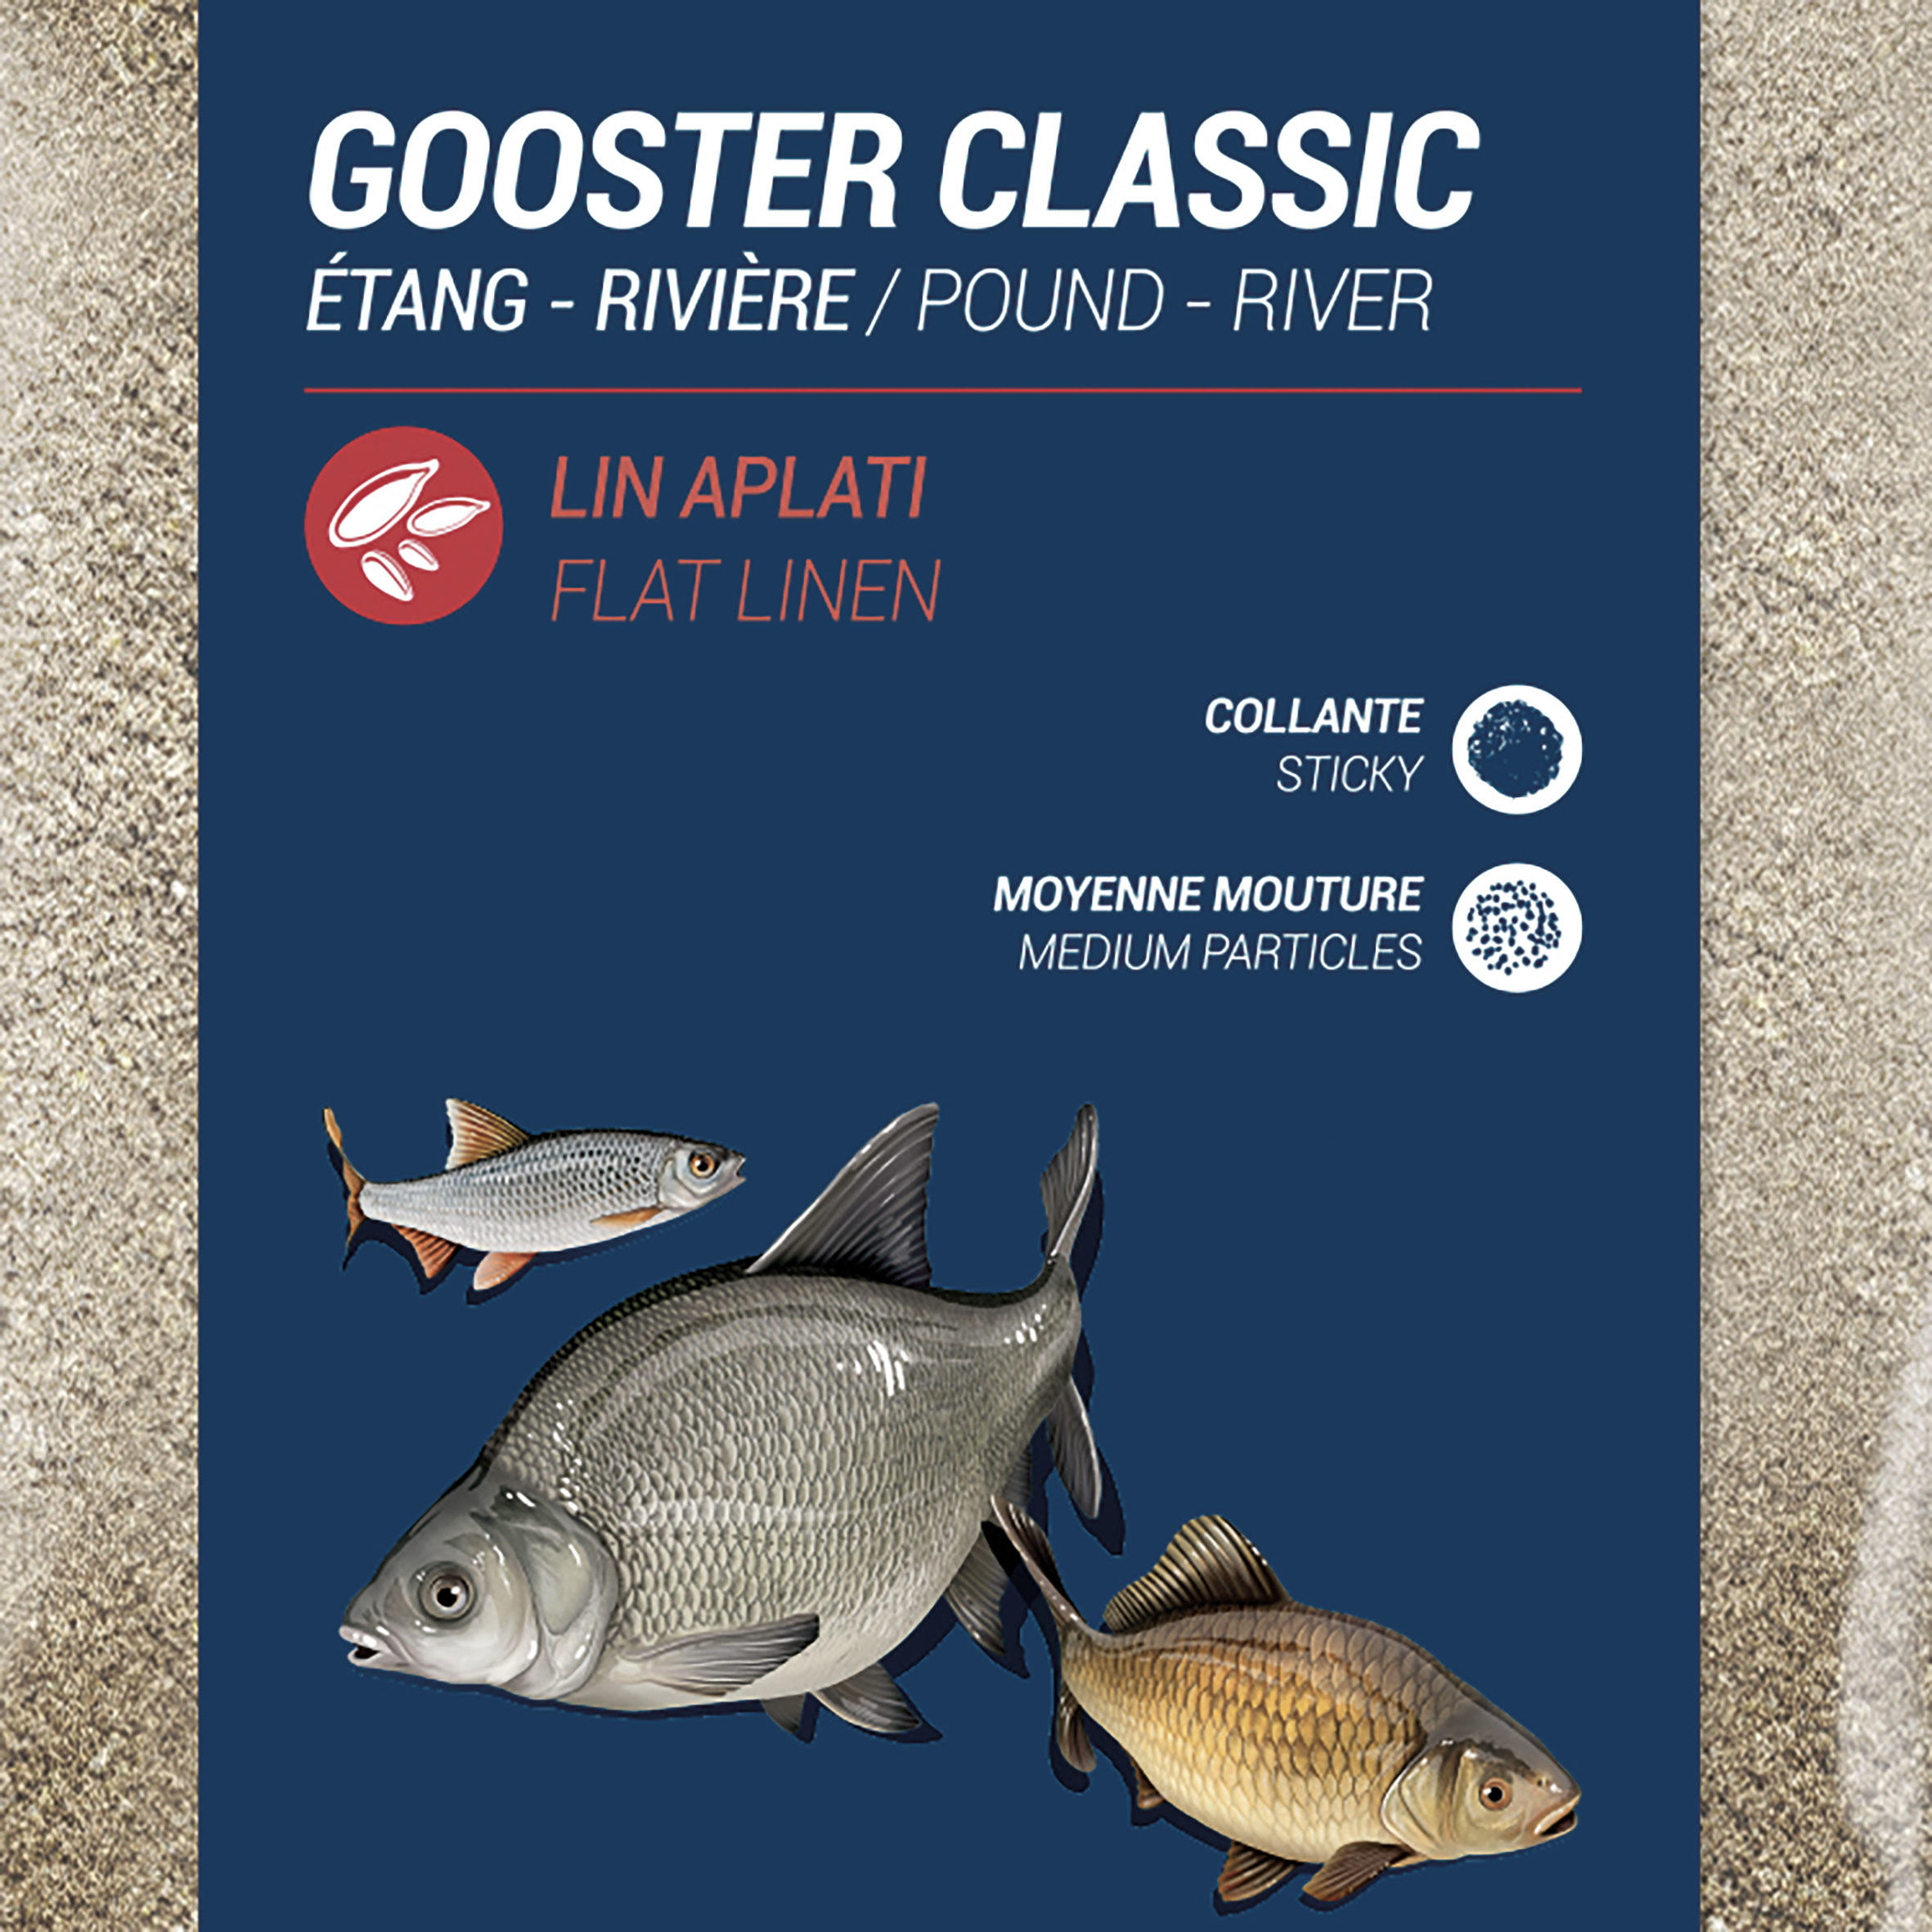 GOOSTER CLASSIC BAIT FOR ALL FISH ANISE 4X4 9.5kg 2/5